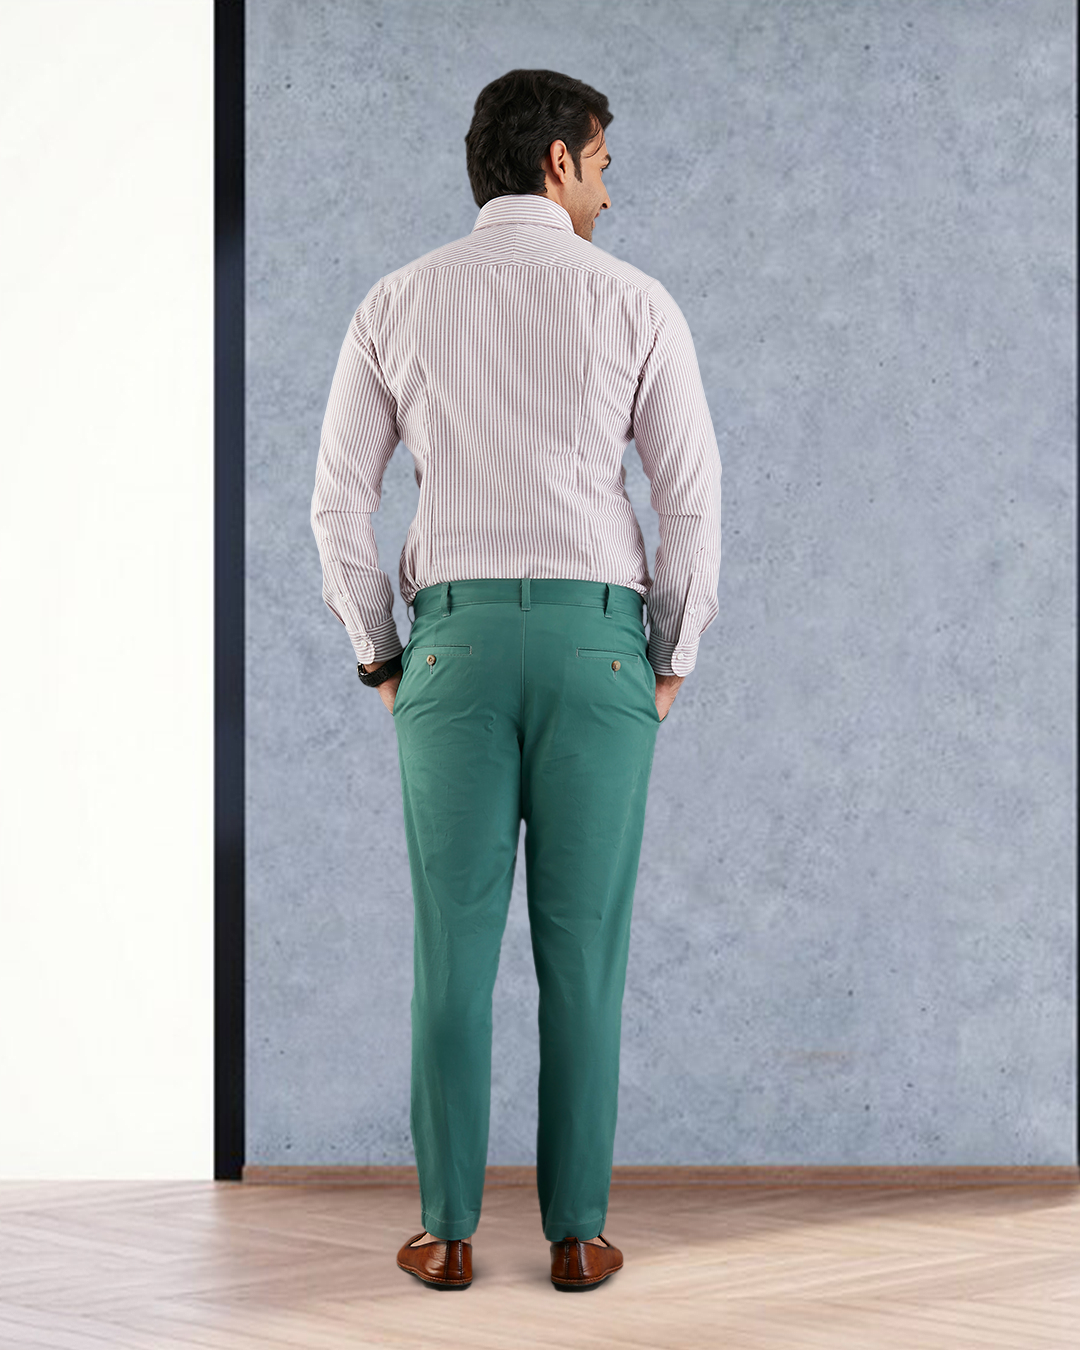 Model back view wearing custom Genoa Chino pants for men by Luxire in fern green hands together